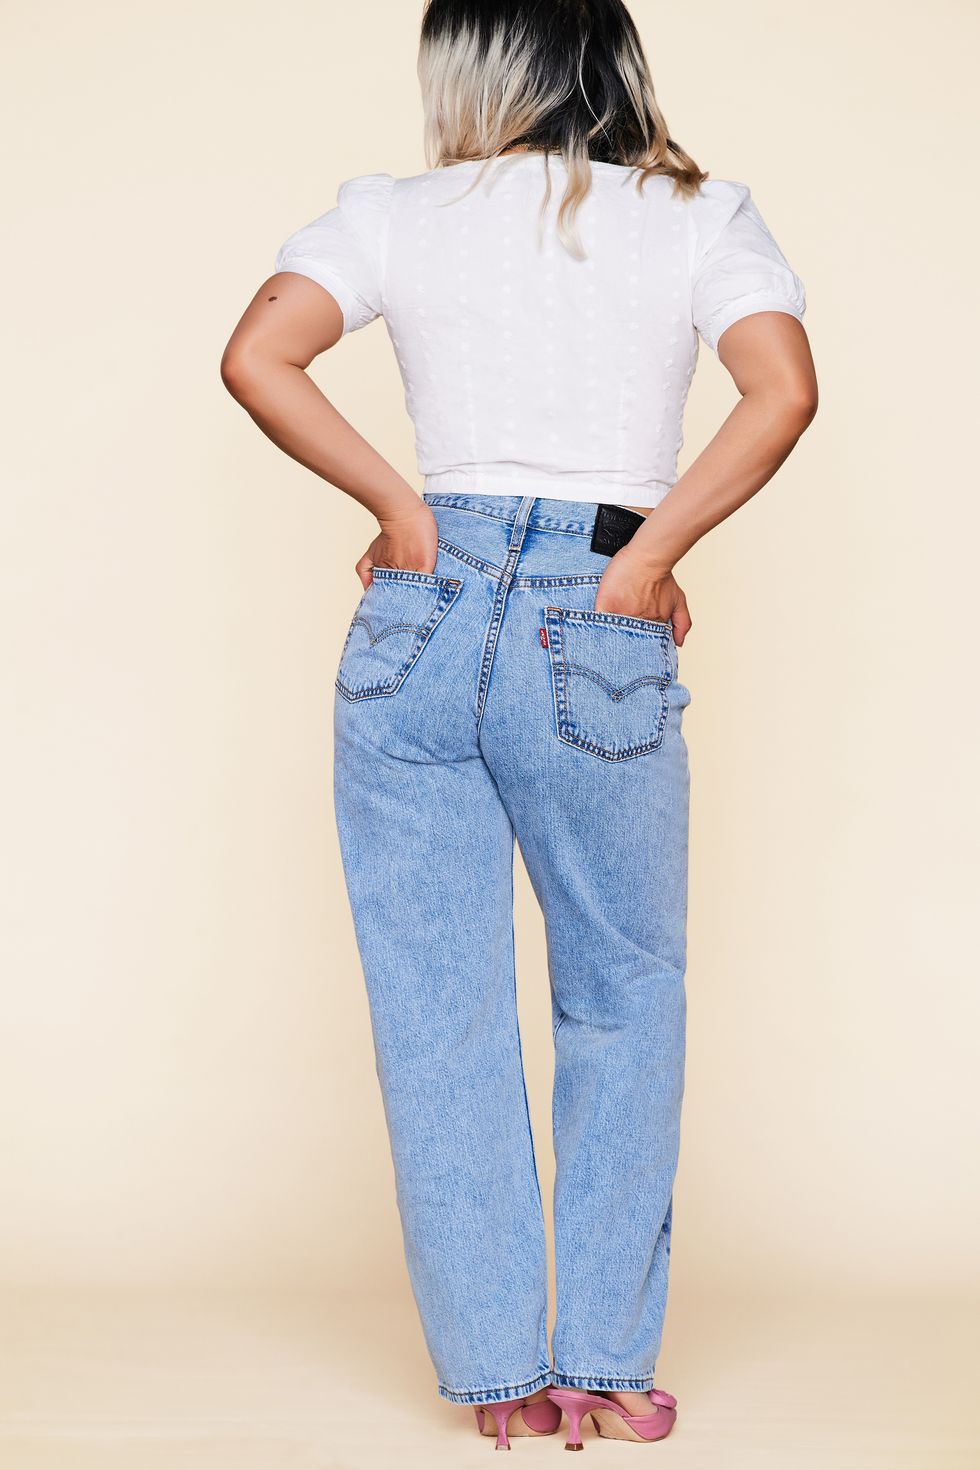 New Levi's That Look Vintage - Levi's Baggy No-Stretch Jeans